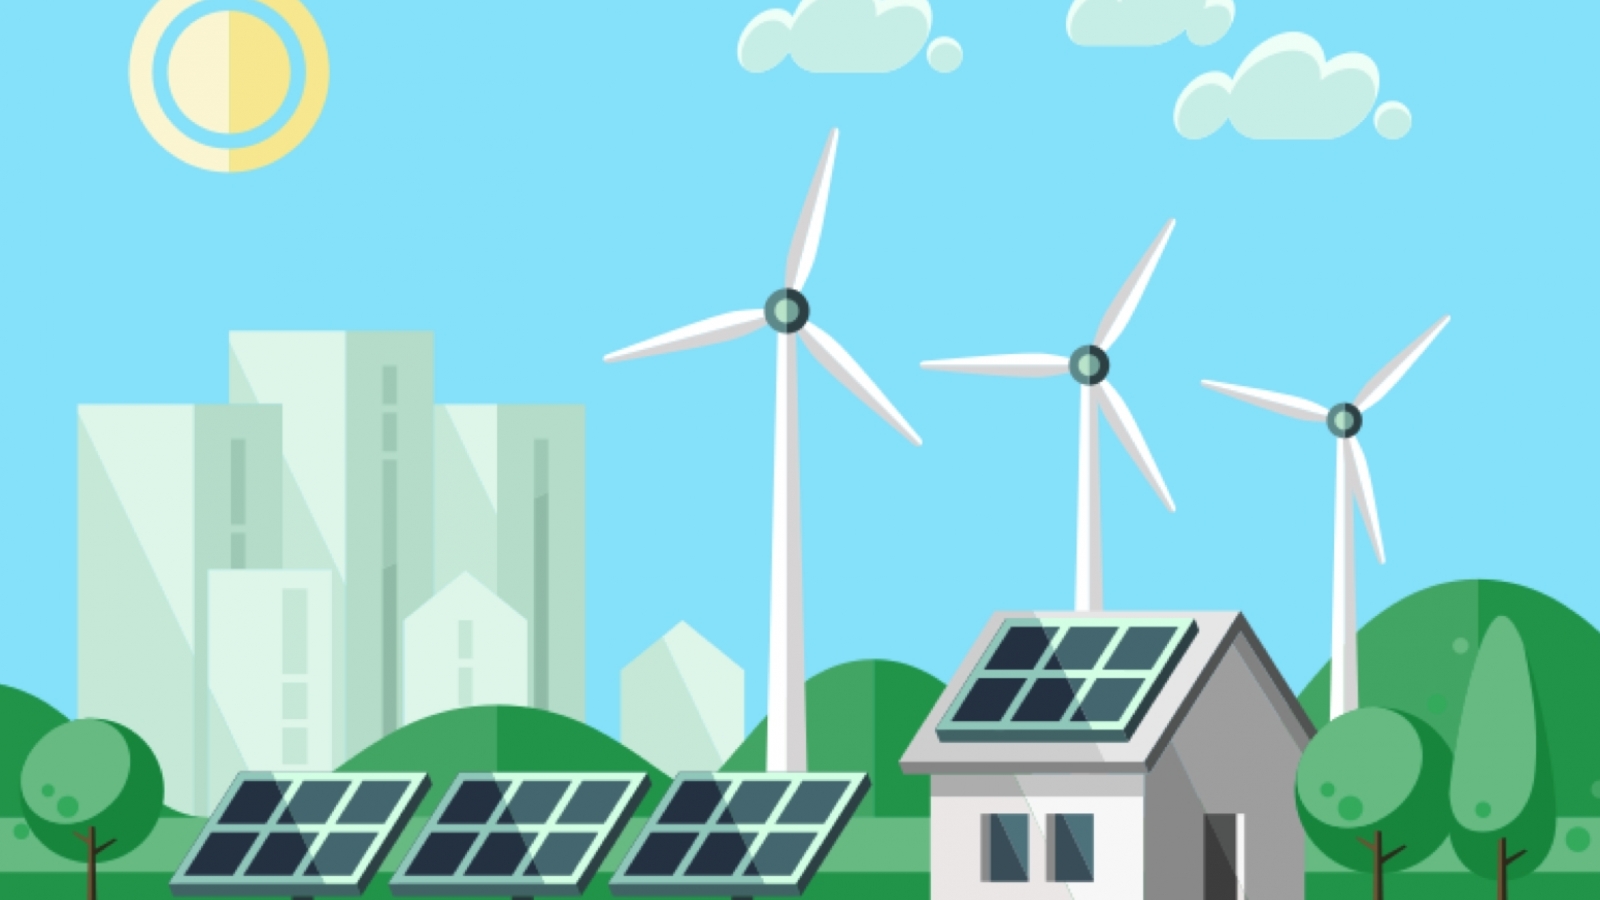 Smarter roll-out of electricity grids makes integrating 35% renewables easier and cheaper